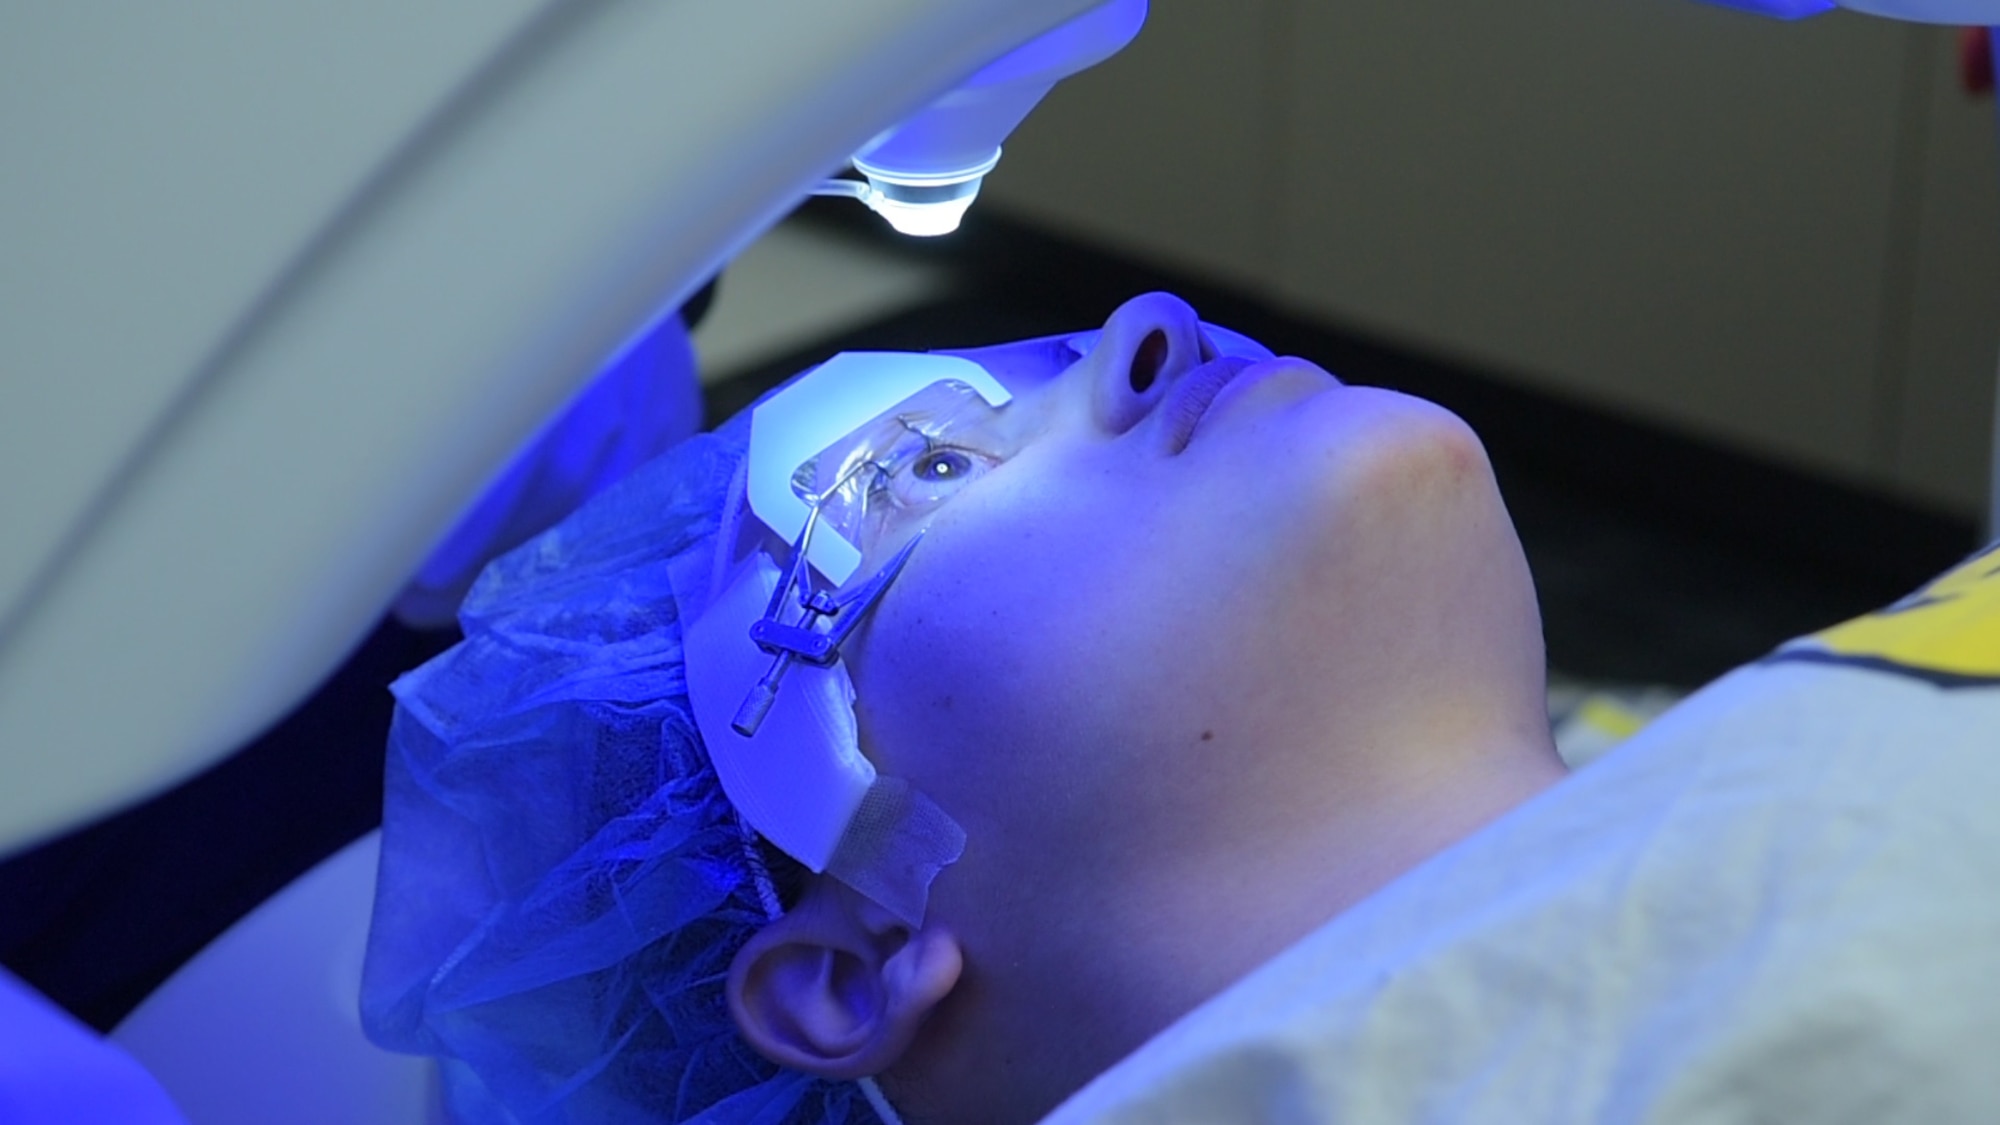 A patient receives small incision lenticule extraction treatment at the Joint Warfighter Refractive Surgery Center, Wilford Hall Ambulatory Surgical Center, Jan. 15, 2019. SMILE treatment is one of three laser surgeries performed to enhance a warfighter's vision. Surgeons at WHASC Joint Warfighter Refractive Surgery Center executed the center's 50,000th surgery since its opening in 2000. (U.S. Air Force photo by Airman 1st Class Ryan Mancuso)